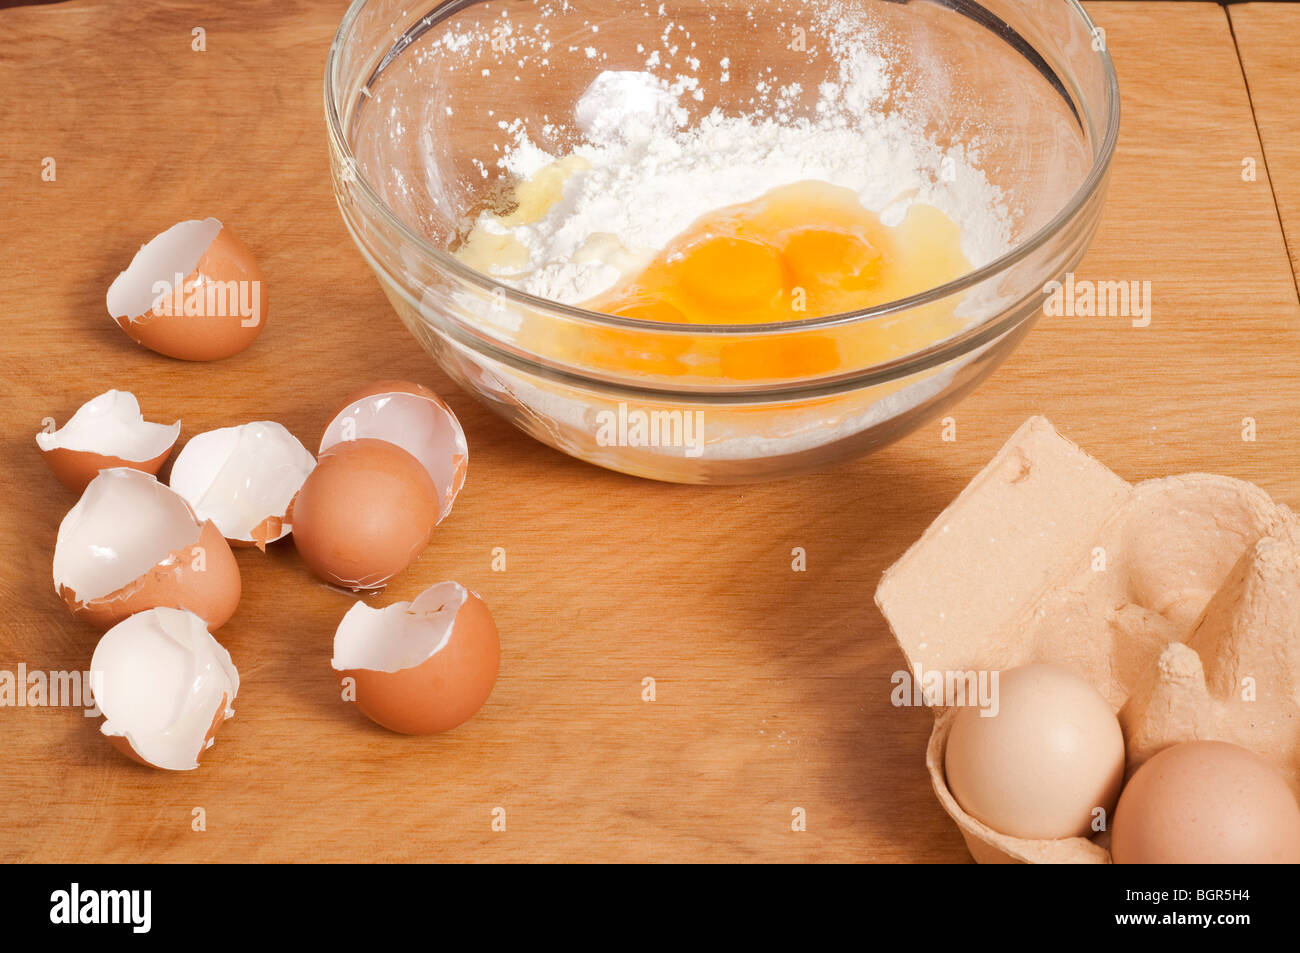 Mixing bowl of flour with eggs shells Stock Photo